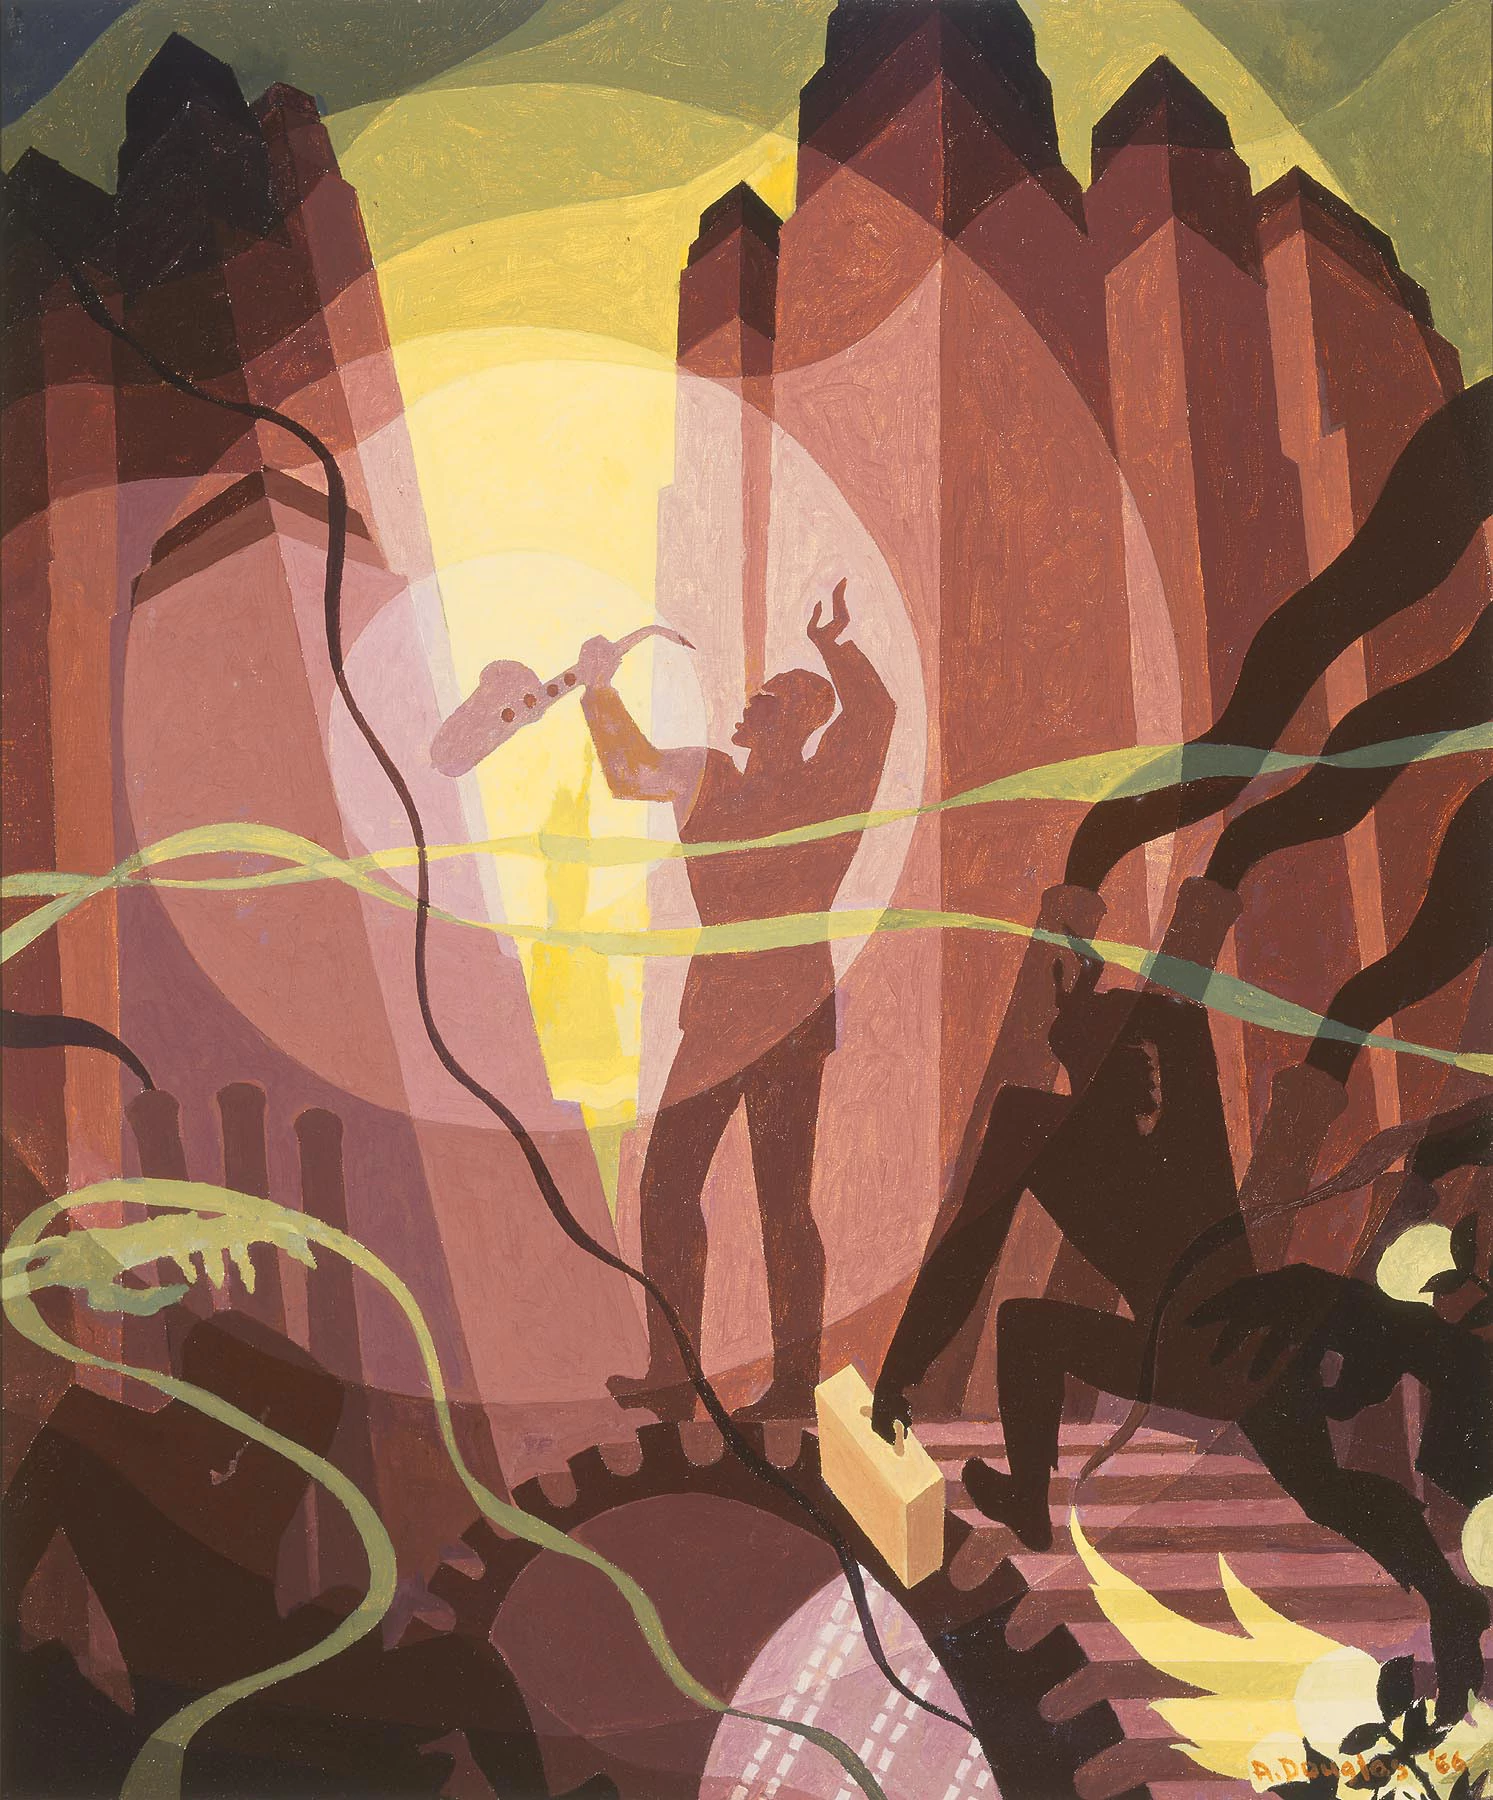 Song of the Towers, Aaron Douglas